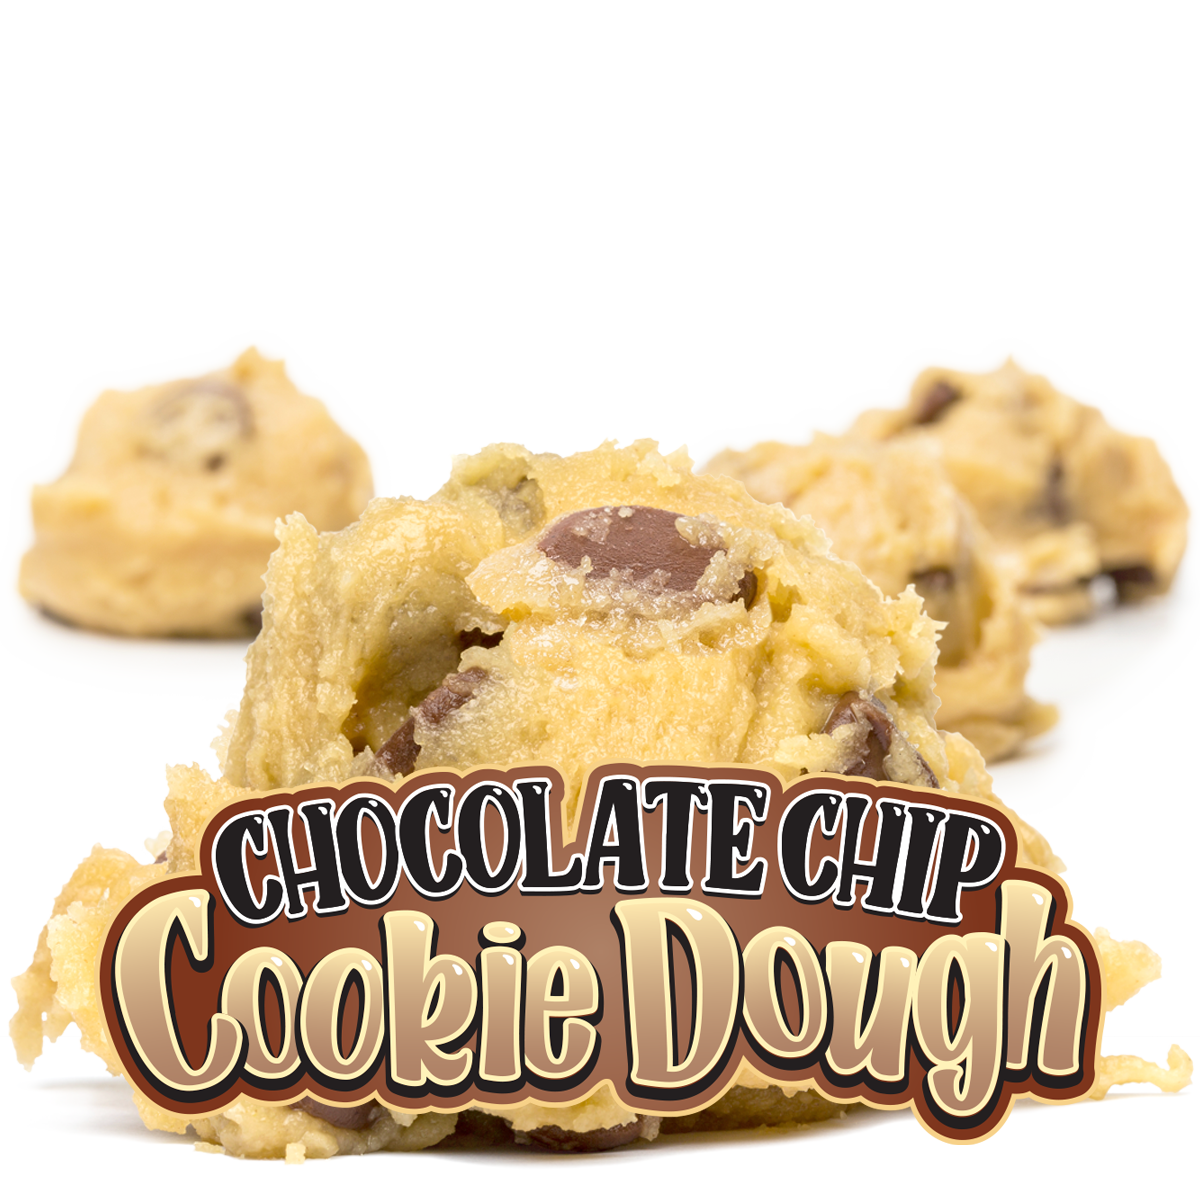 DIESEL® PROTEIN BAR 12 PACK - CHOCOLATE CHIP COOKIE DOUGH